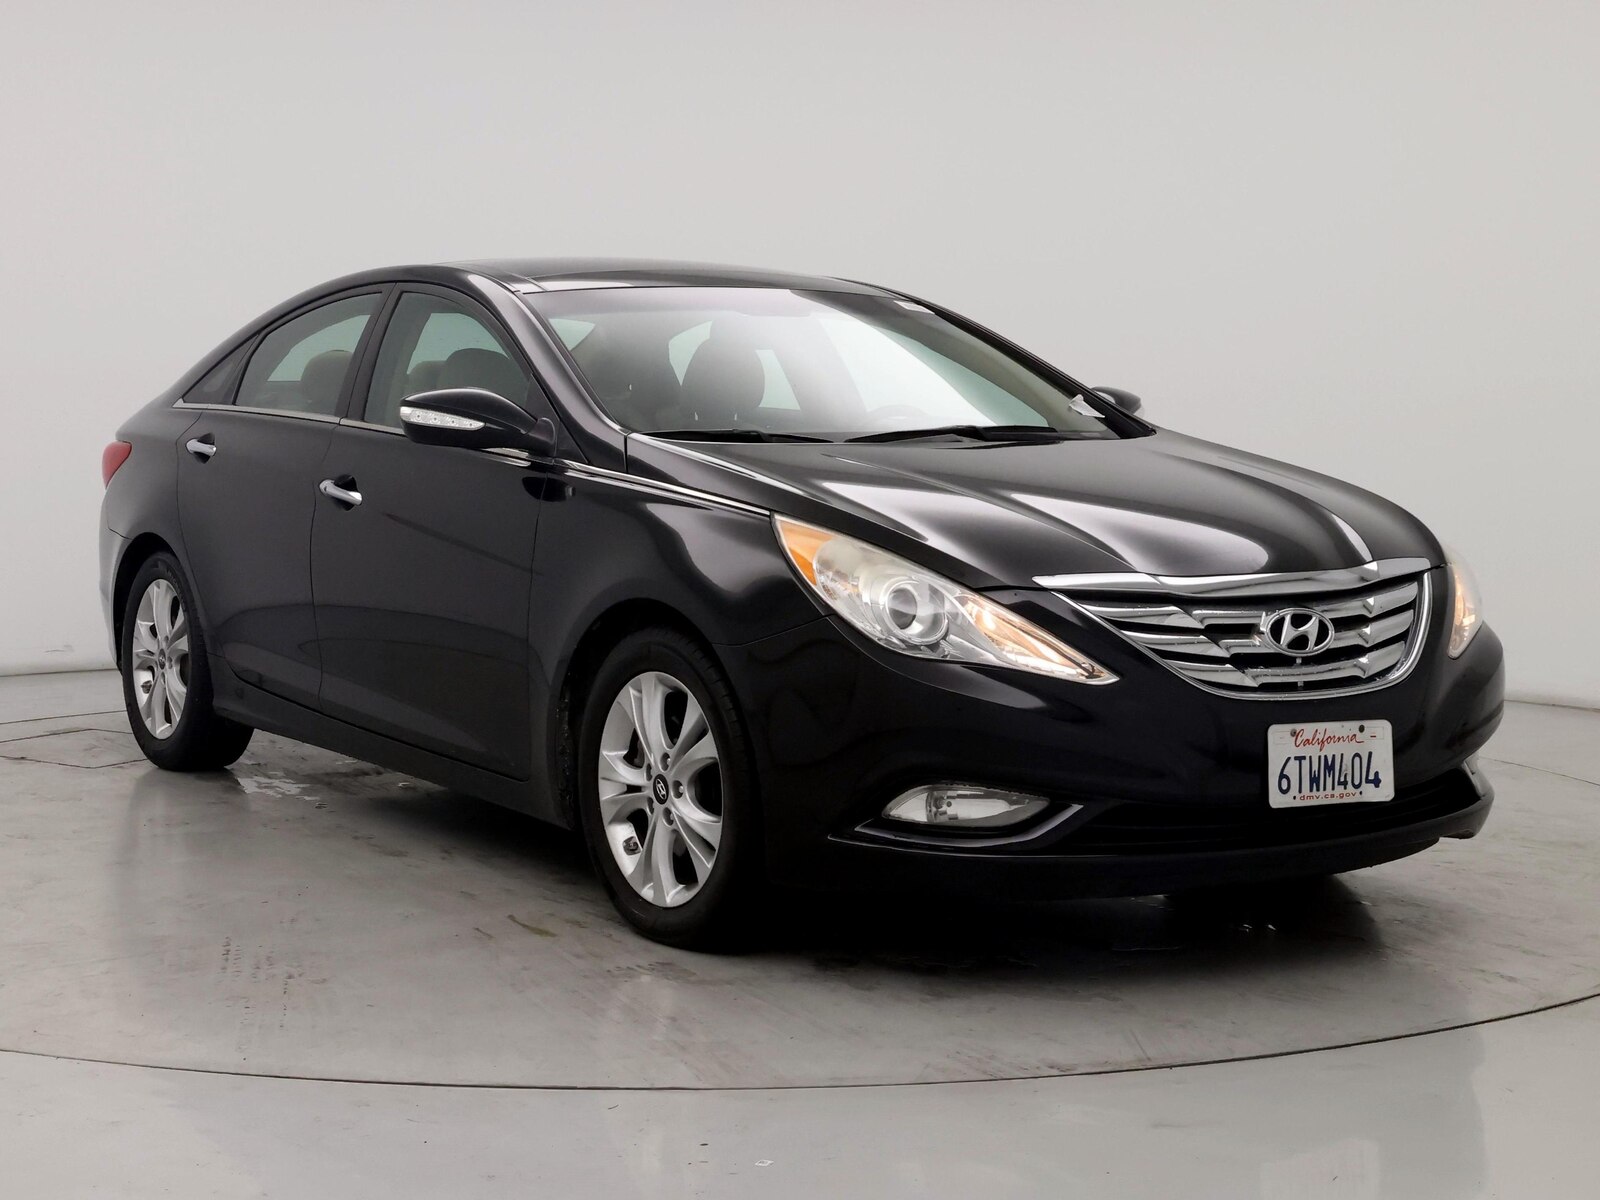 Used 2012 Hyundai Sonata Limited with VIN 5NPEC4AC6CH363665 for sale in Spokane Valley, WA